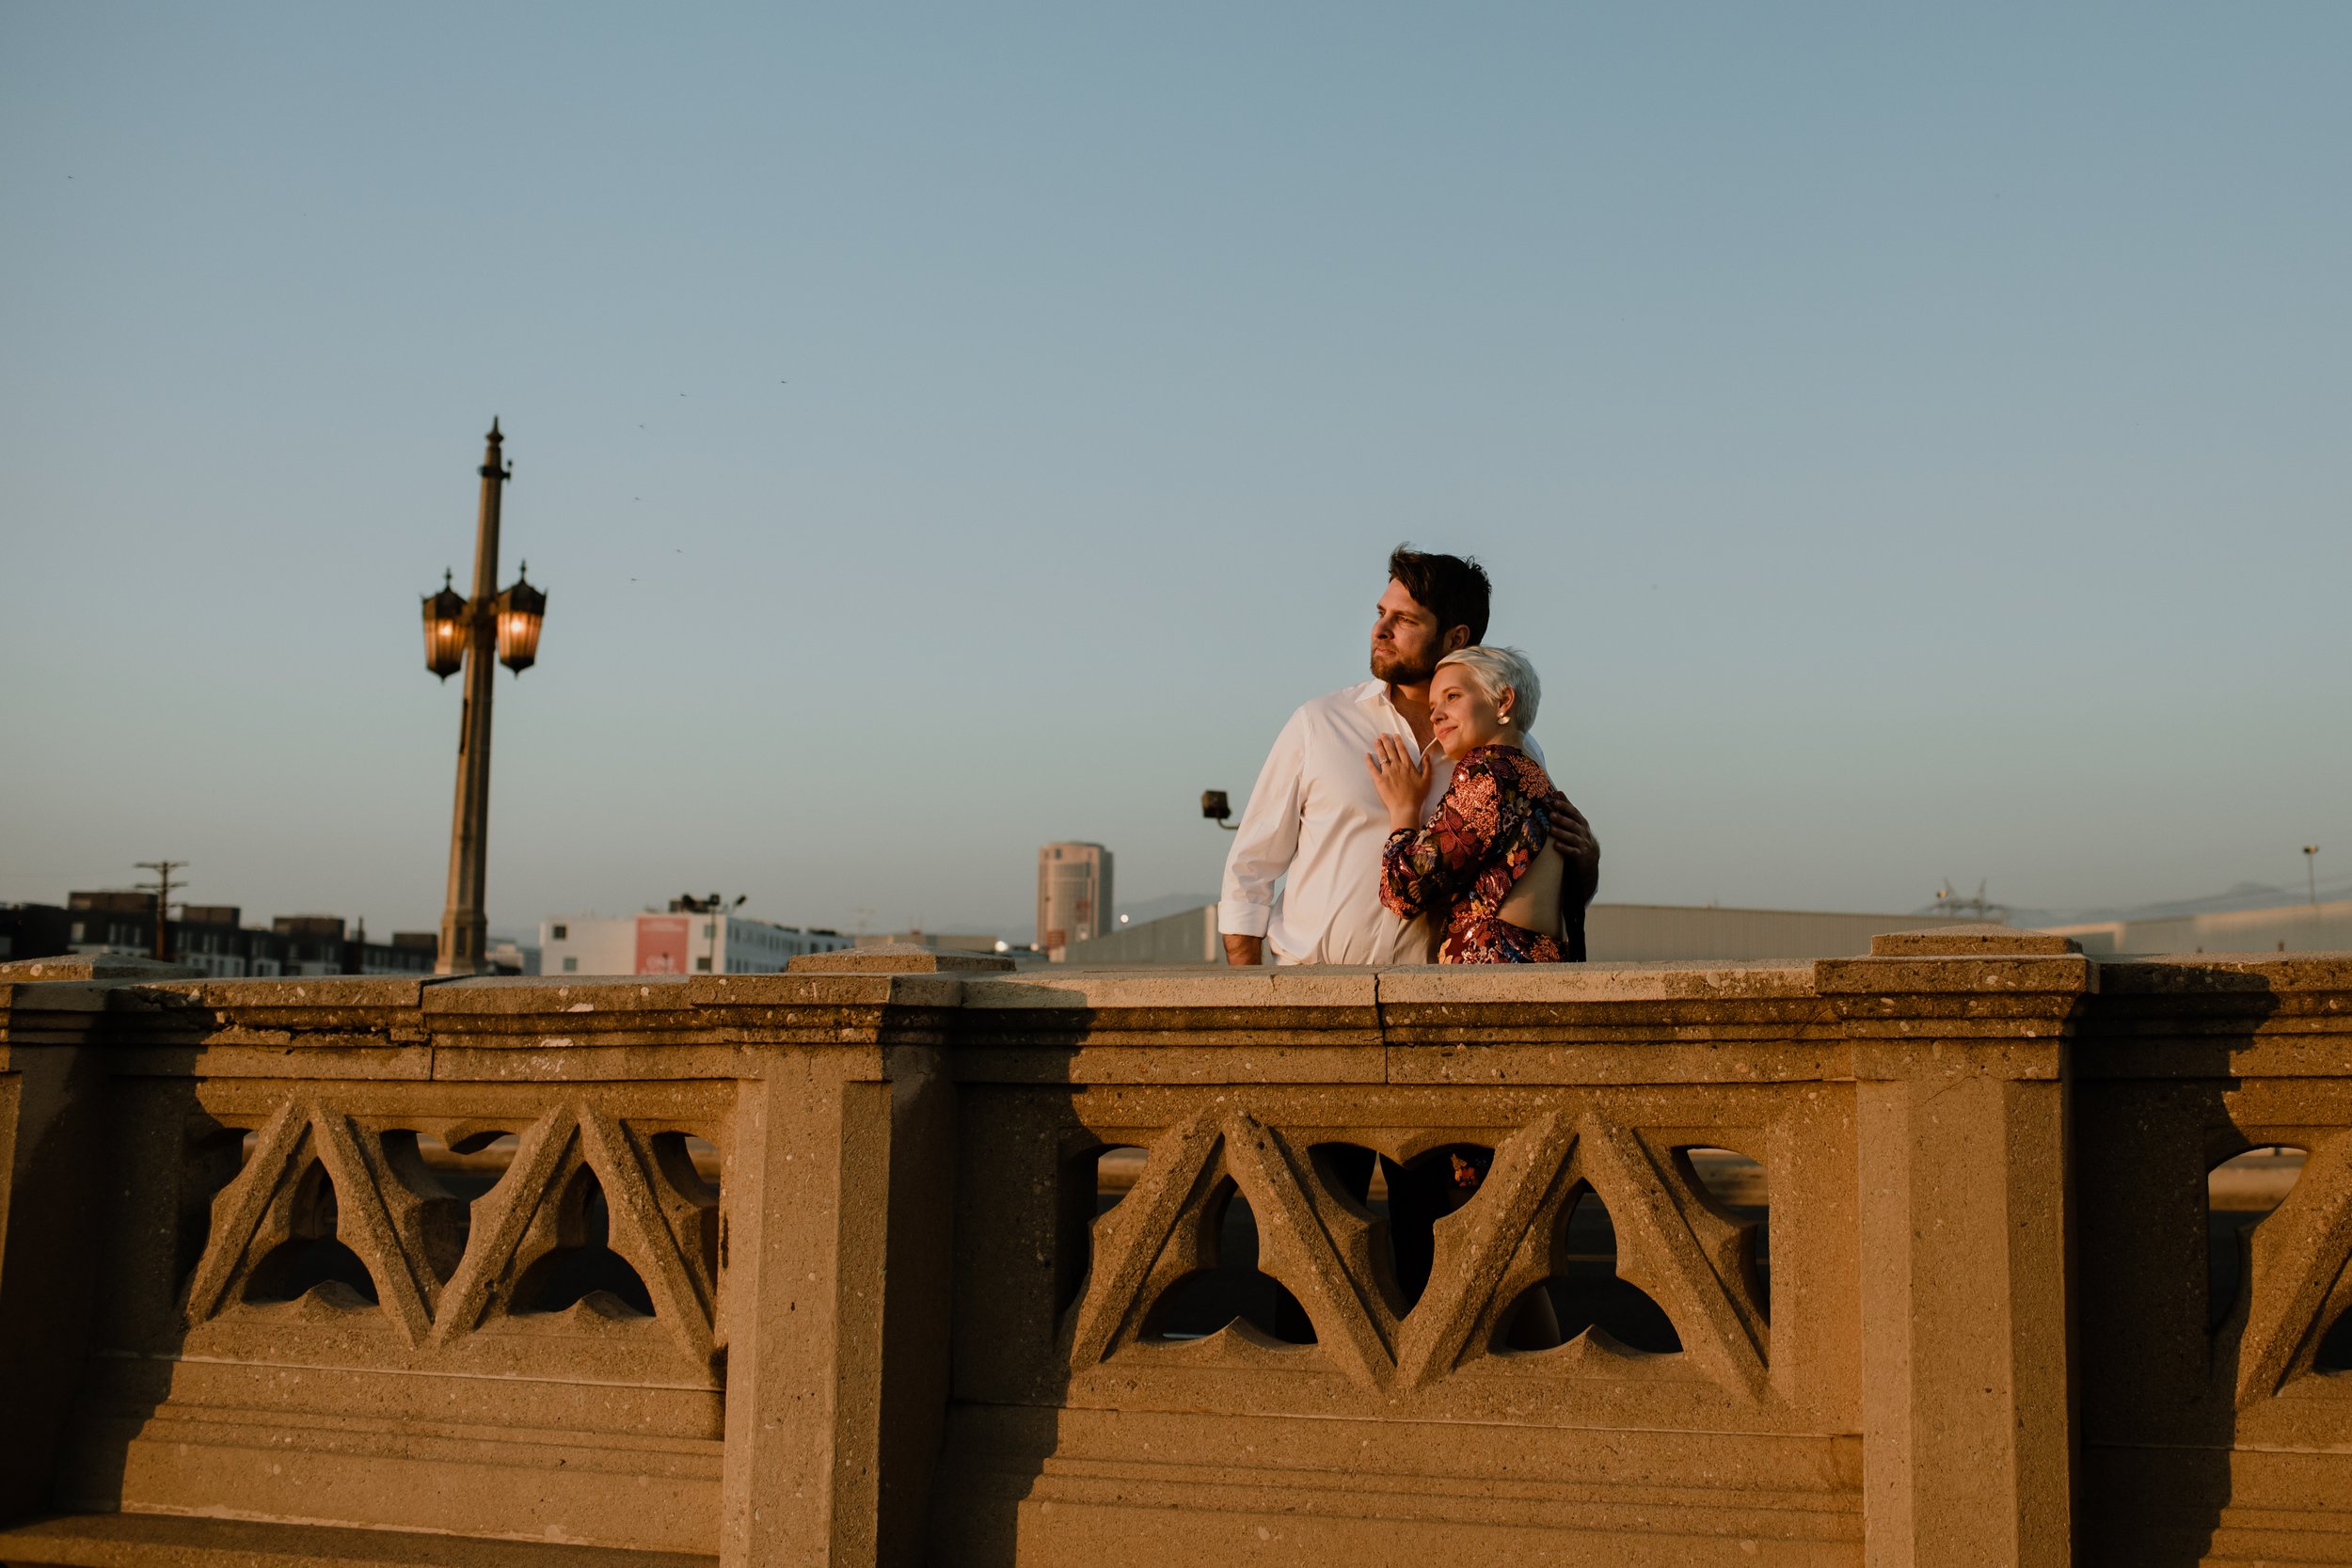 Ali and Jack Engagement Session DTLA - Eve Rox Photography-43.jpg